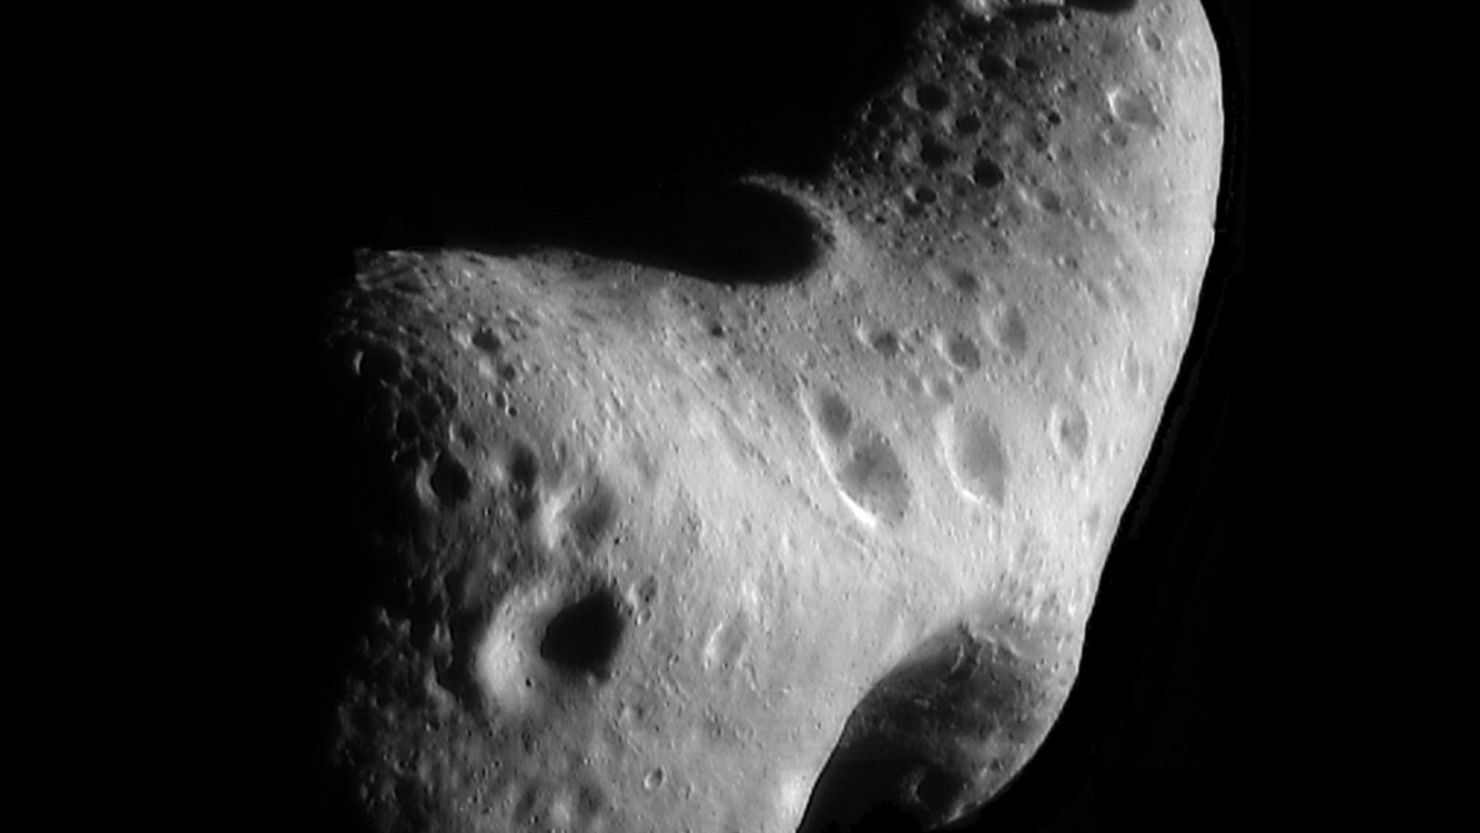 This image, taken by NASA's Near Earth Asteroid Rendezvous mission in 2000, shows a close-up view of the asteroid Eros.